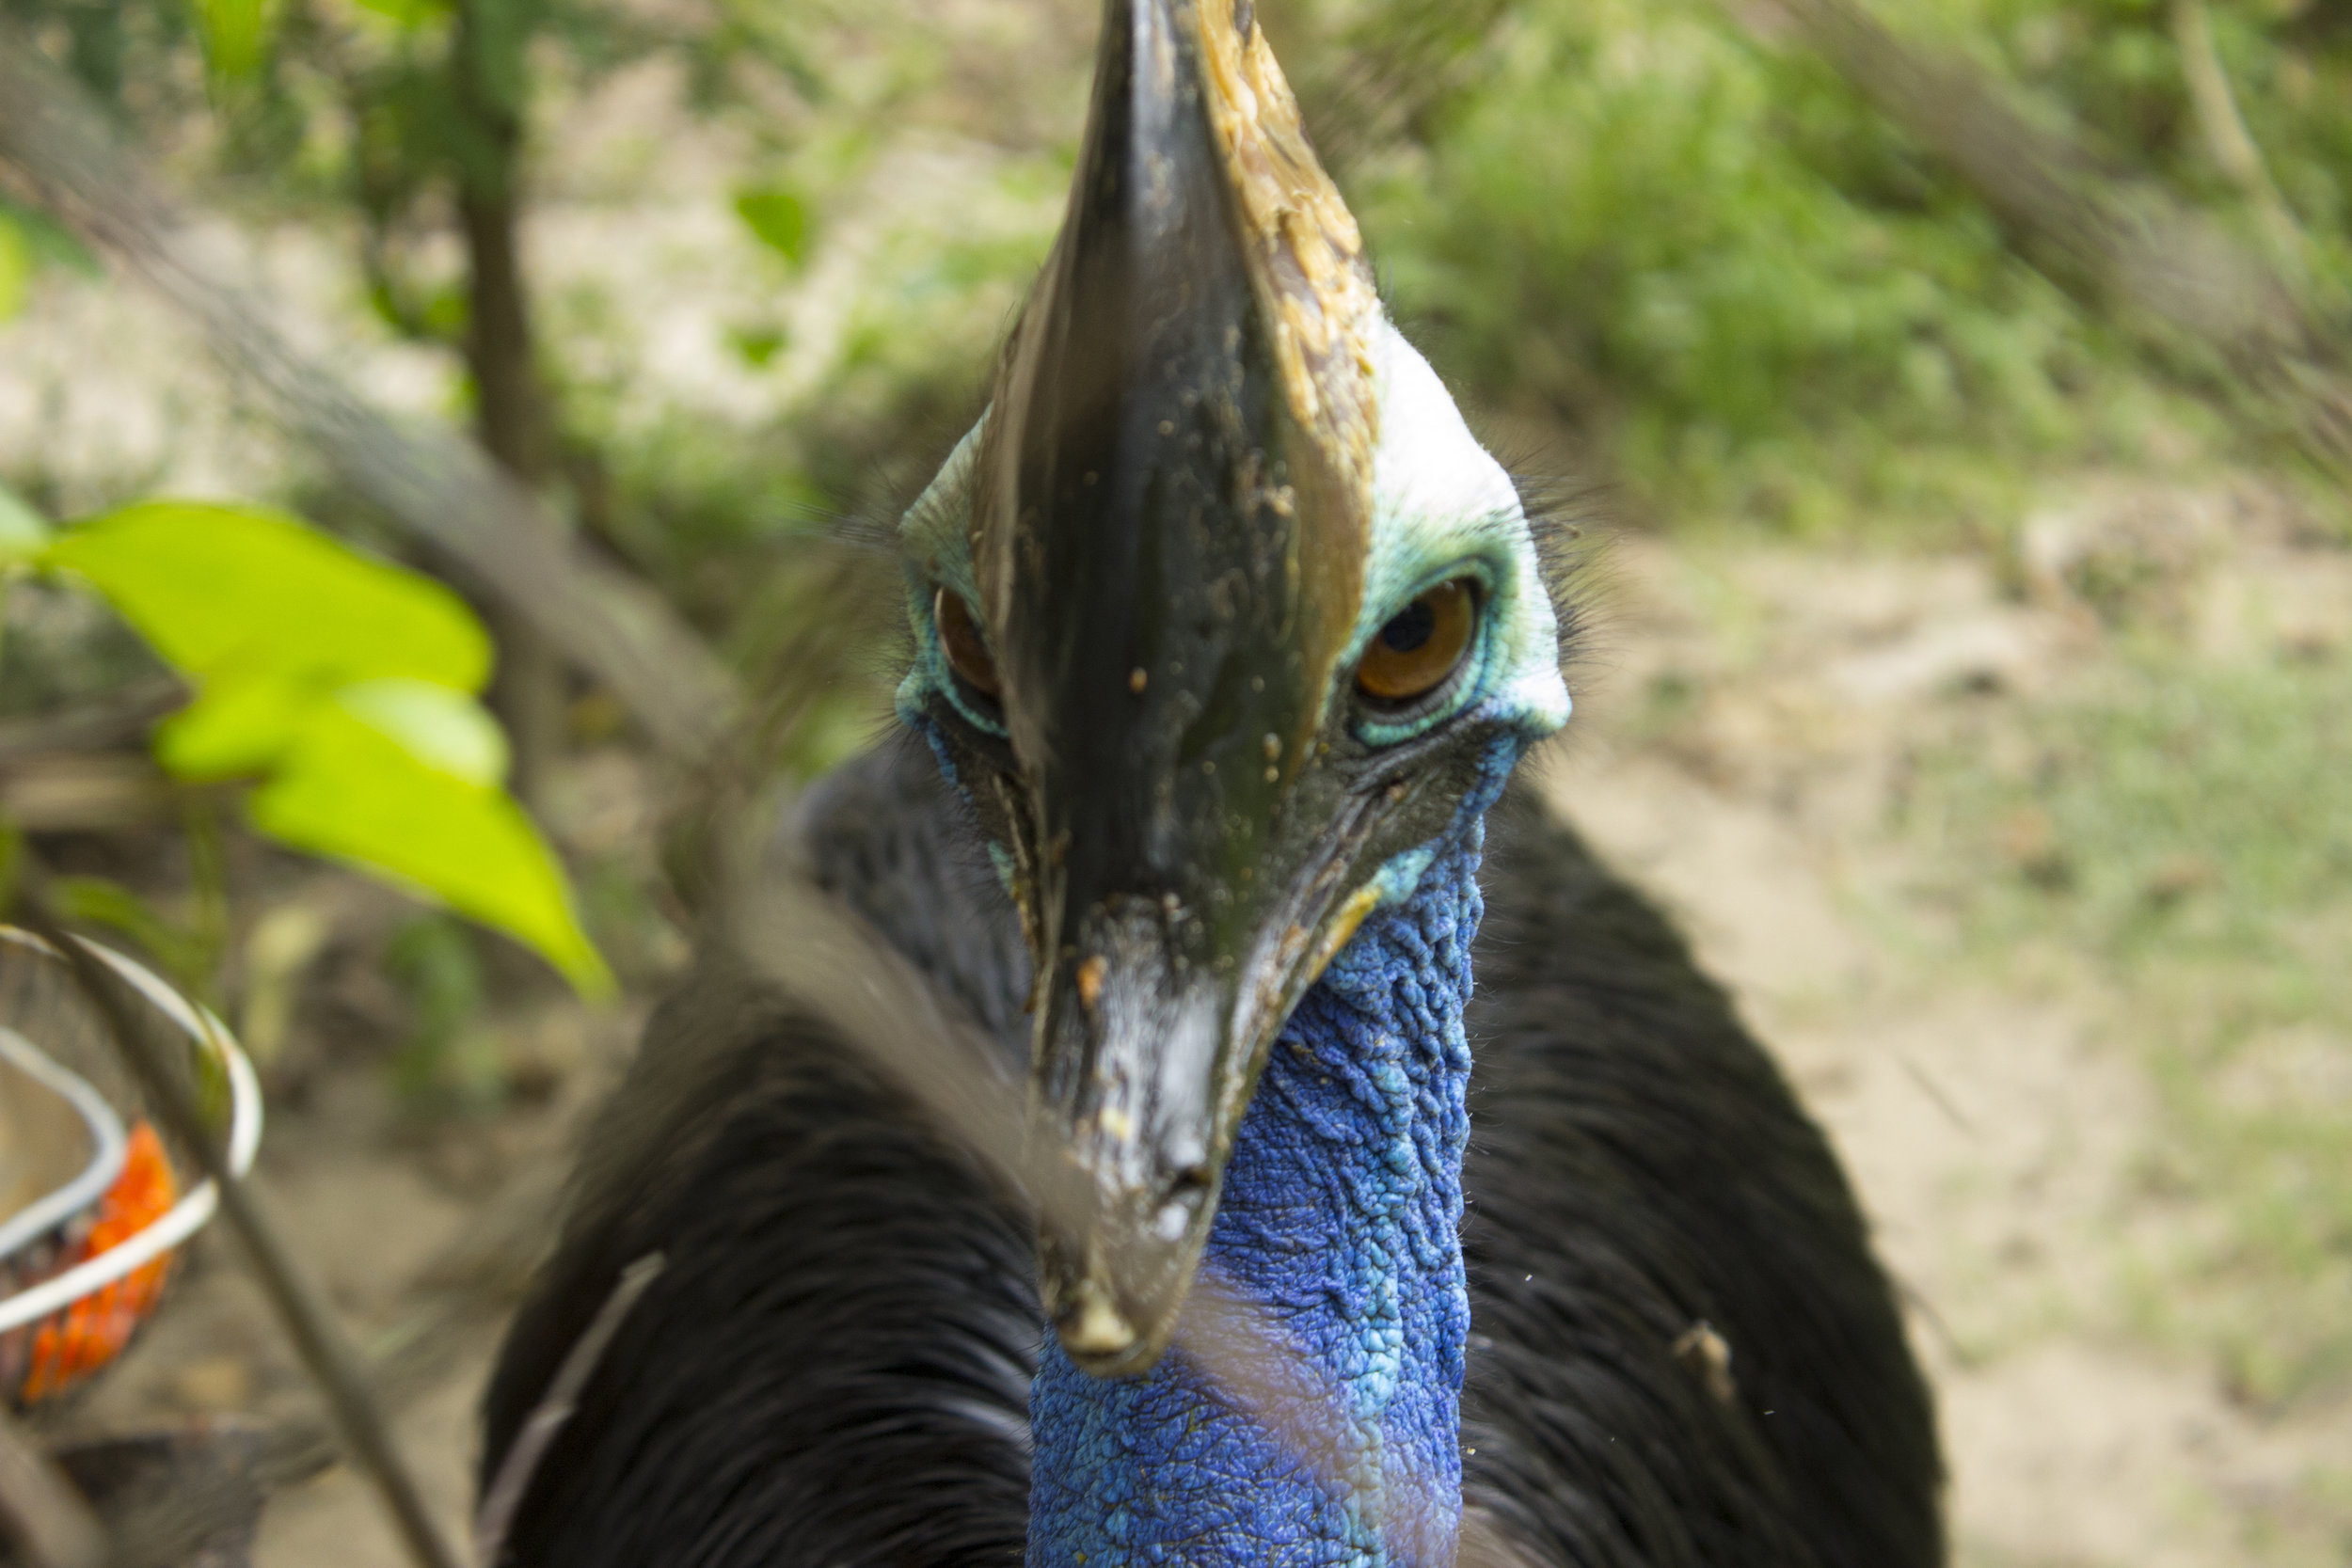  Some animals at the center were abandoned exotic pets — a cassowary, far from its native Australia, was taken in after being imported by a rich owner. Not knowing how to handle the bird, someone had crushed its delicate casque (keratin-made crest on